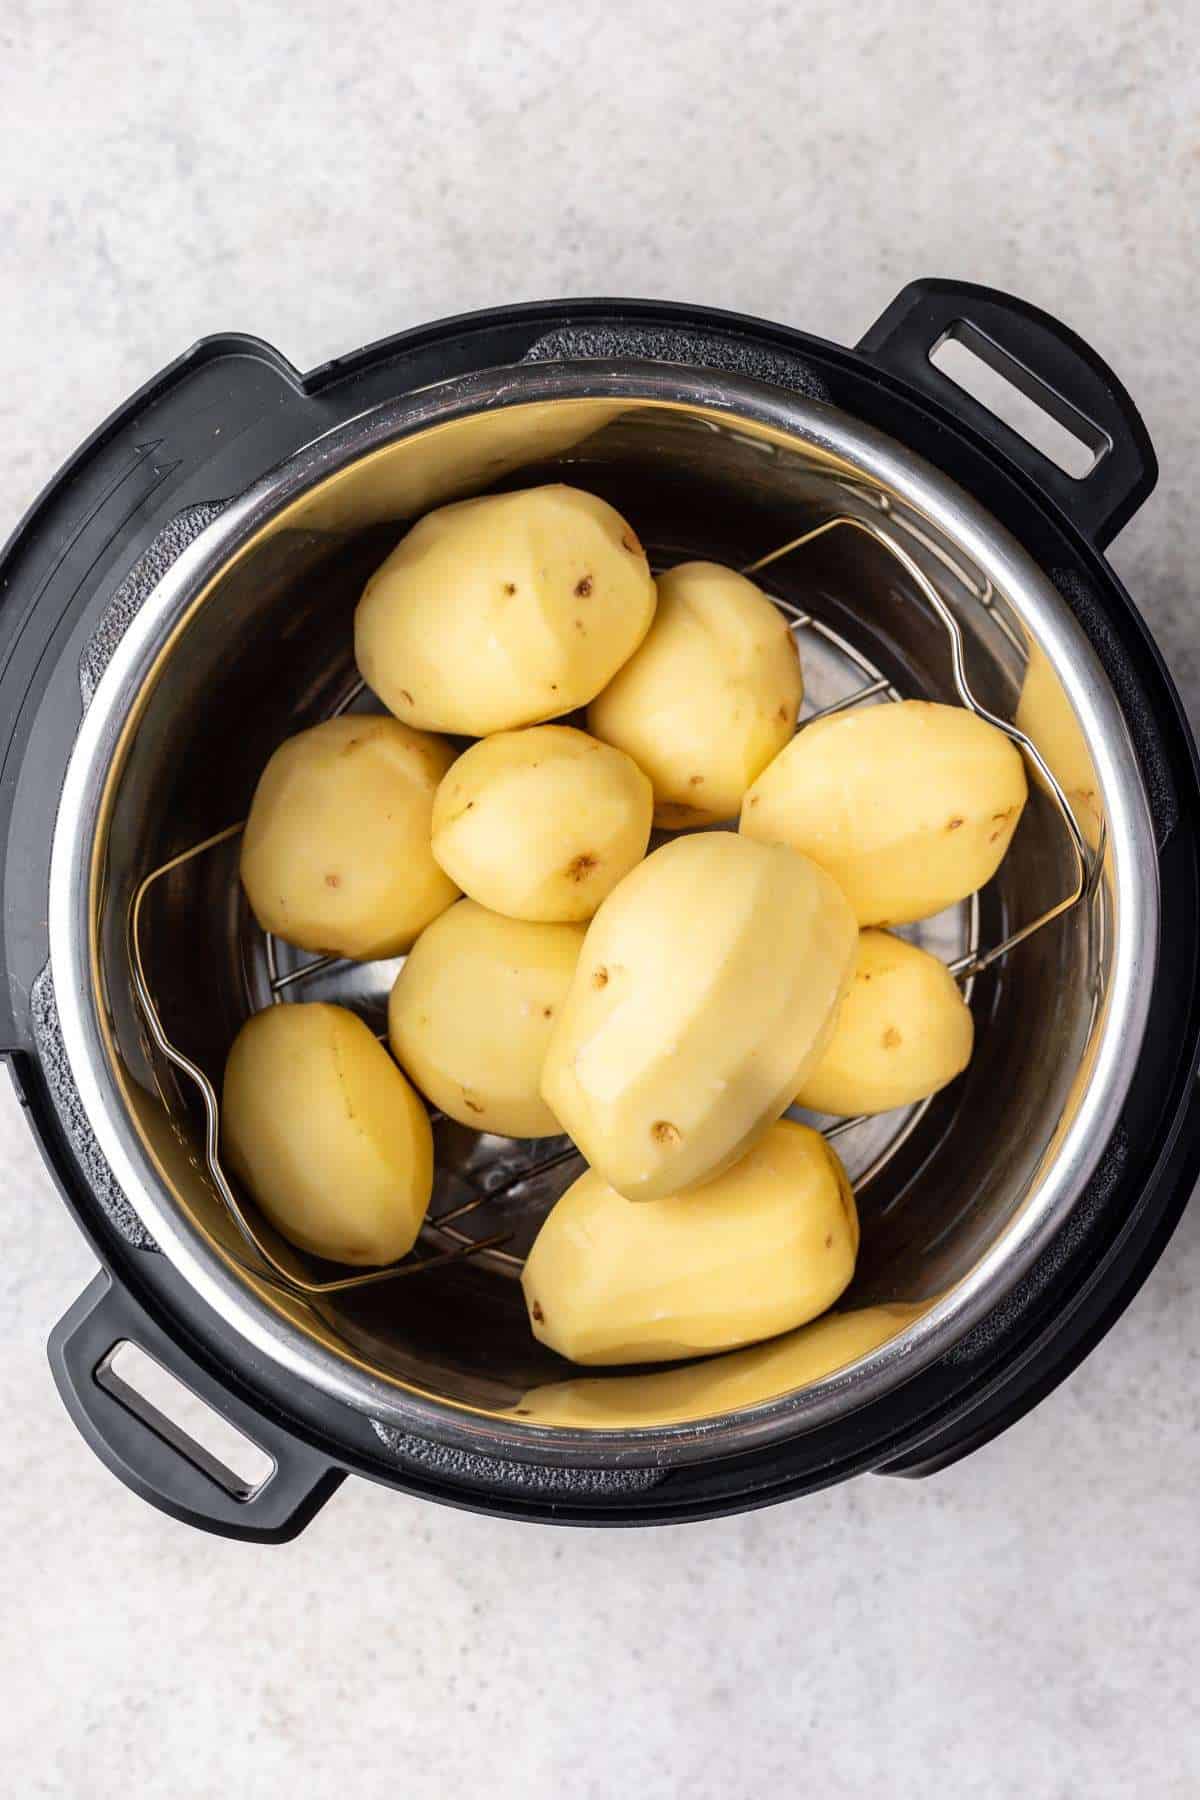 Potatoes before pressure cooking to make the mashed potato topping.